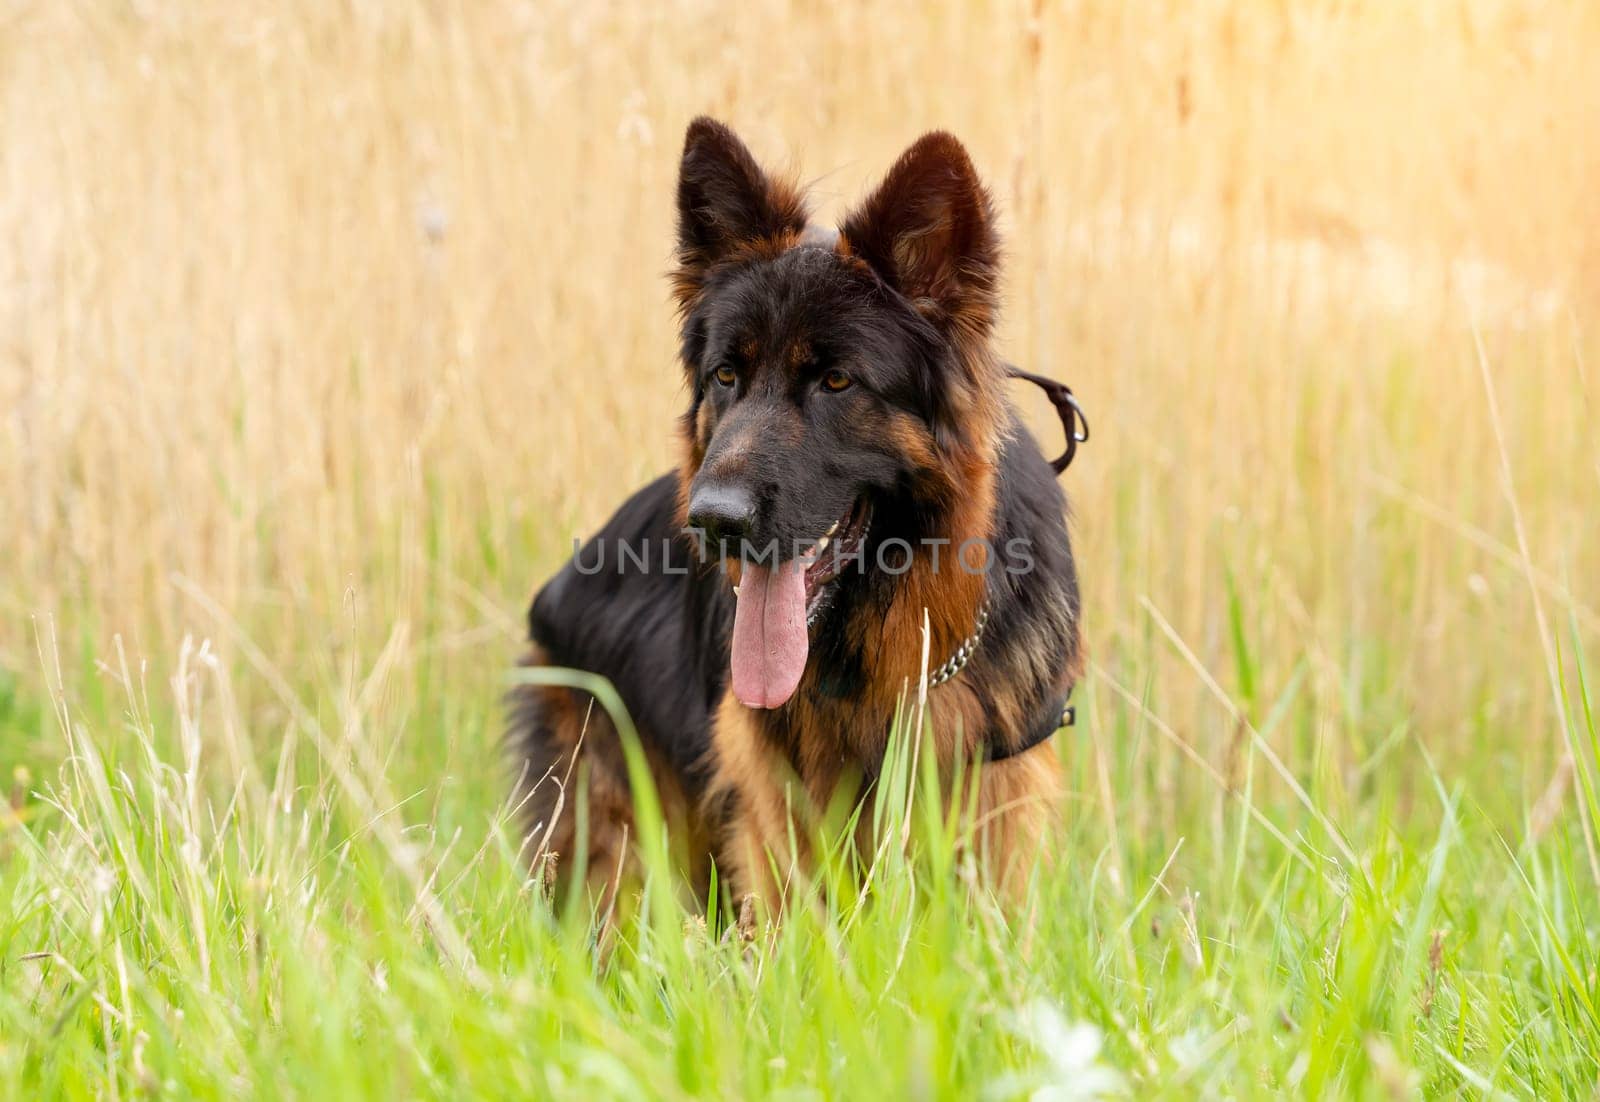 German shepherd dog in harness out for a walk lying, running, walking on the grass in sunny summer day by Iryna_Melnyk